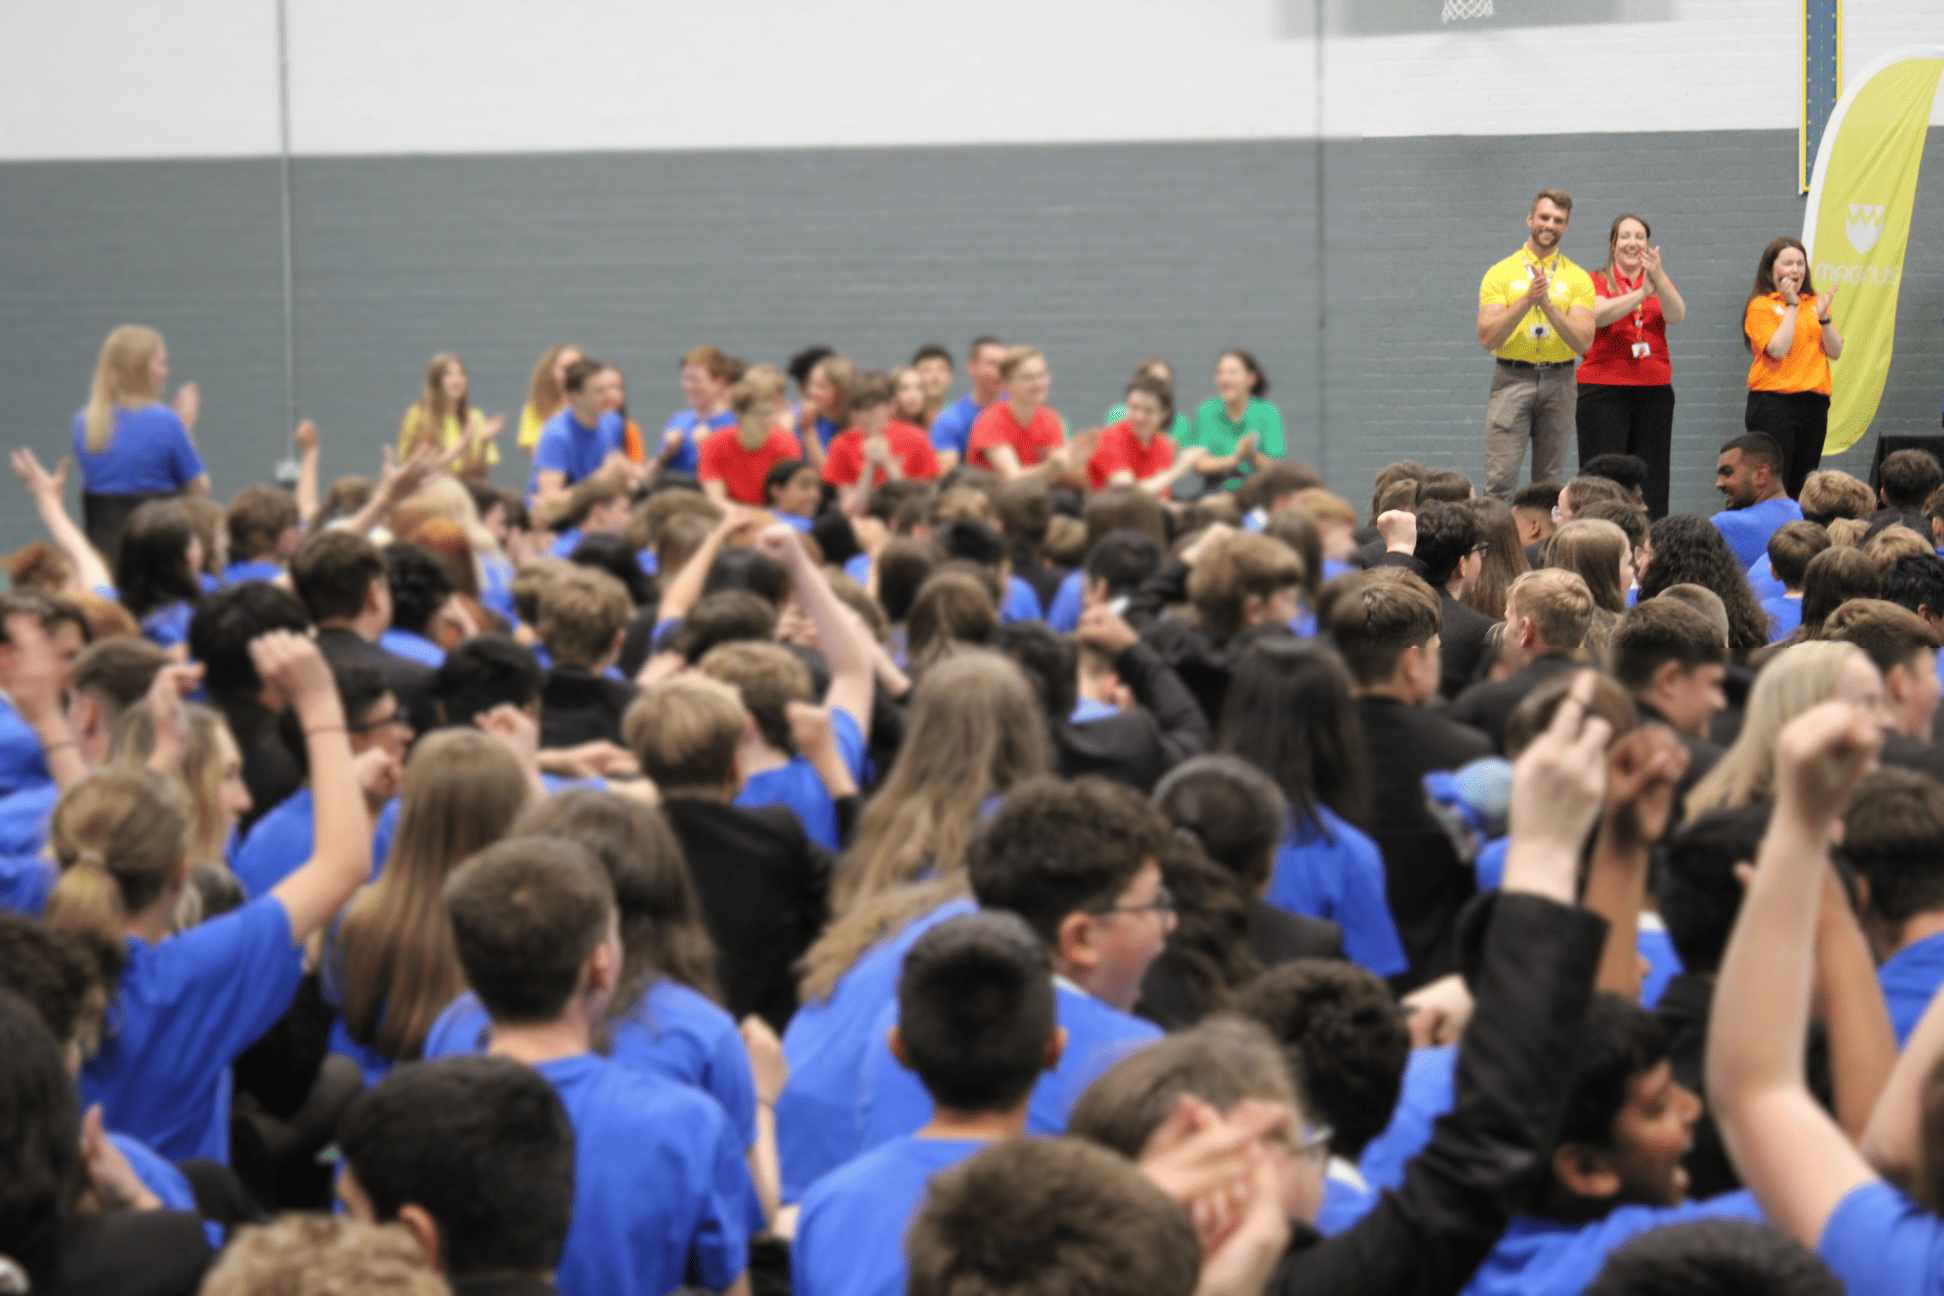 Cheadle Hulme High School students gathered in the sports hall at the House Cup Assembly